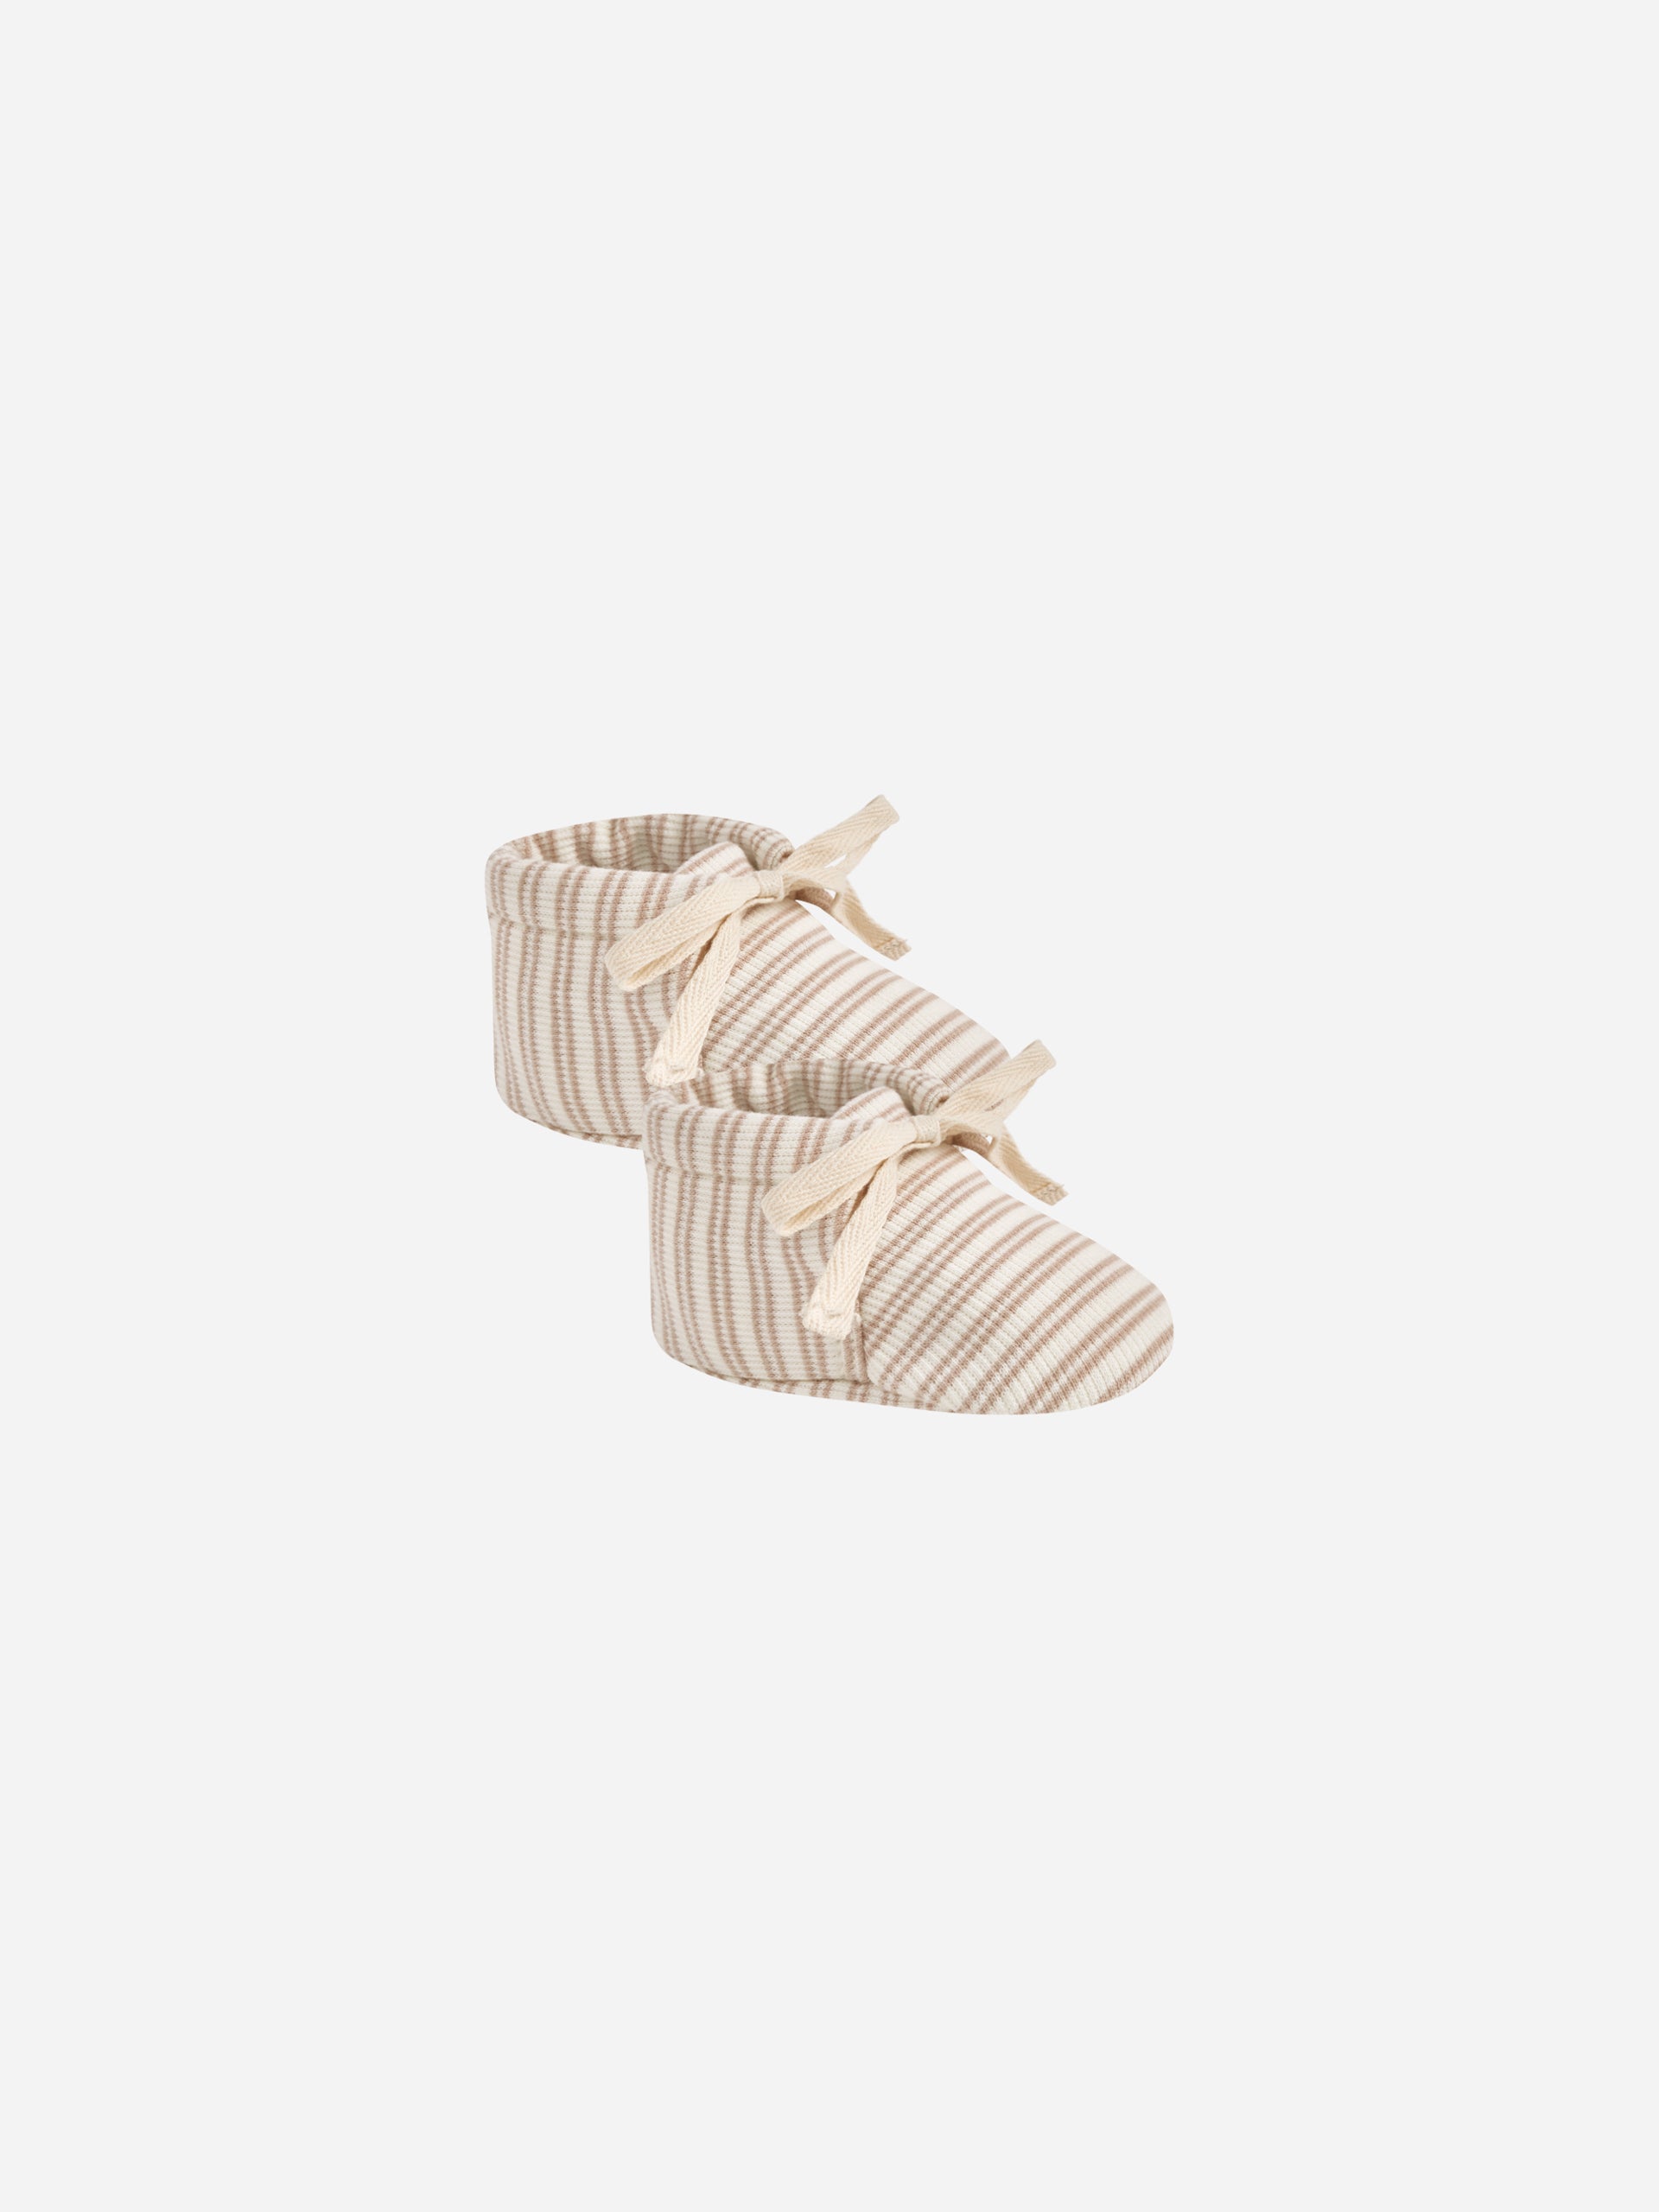 Ribbed Baby Booties || Oat Stripe - Rylee + Cru | Kids Clothes | Trendy Baby Clothes | Modern Infant Outfits |